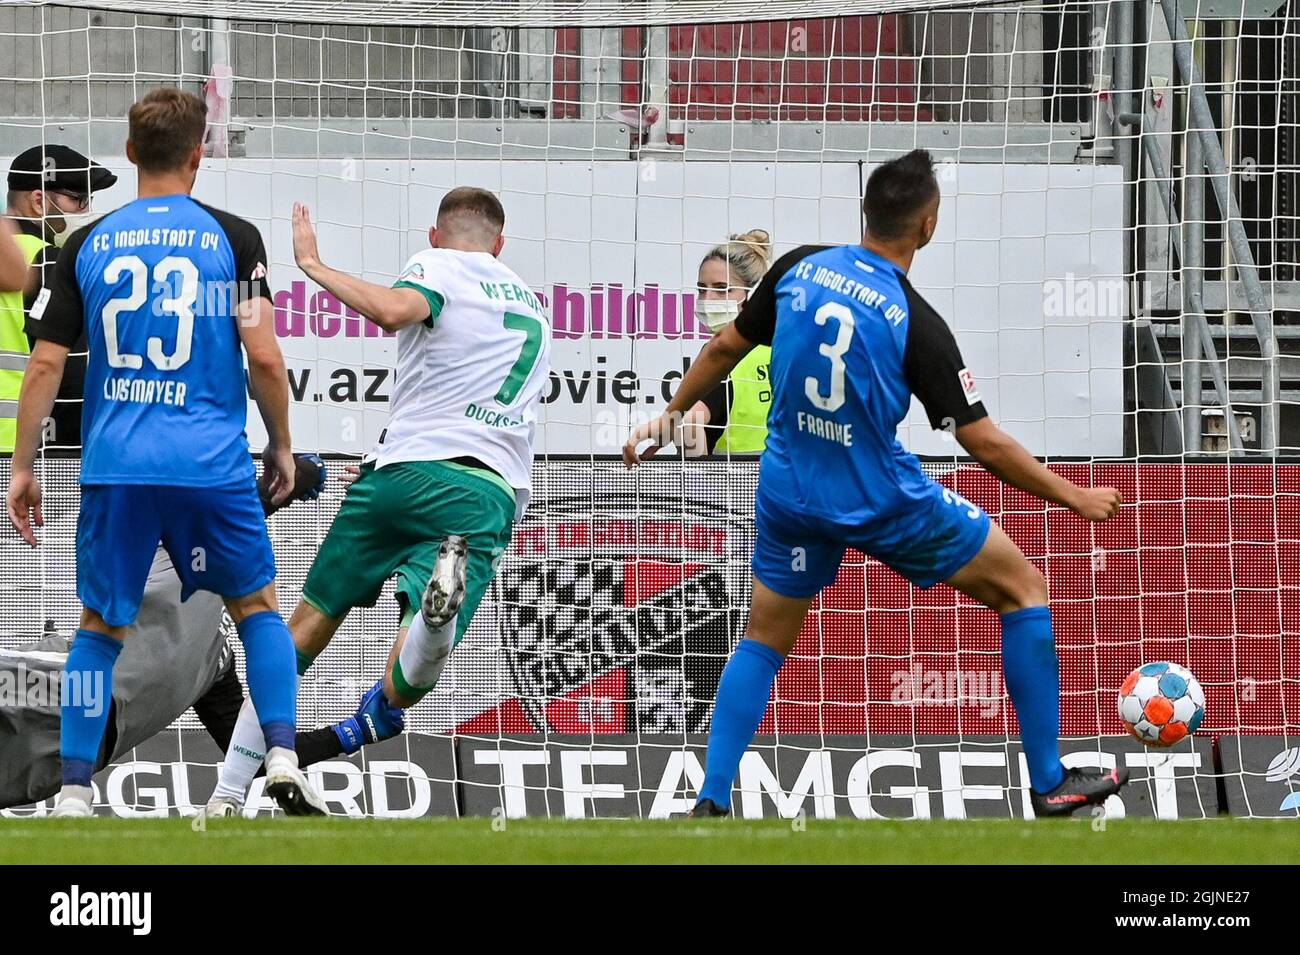 Ingolstadt, Germany. 11th Sep, 2021. Football: 2. Bundesliga, FC Ingolstadt 04 - Werder Bremen, Matchday 6, Audi Sportpark. Bremen's Marvin Ducksch (centre) scores to make it 0:3 against Ingolstadt. Credit: Armin Weigel/dpa - IMPORTANT NOTE: In accordance with the regulations of the DFL Deutsche Fußball Liga and/or the DFB Deutscher Fußball-Bund, it is prohibited to use or have used photographs taken in the stadium and/or of the match in the form of sequence pictures and/or video-like photo series./dpa/Alamy Live News Stock Photo